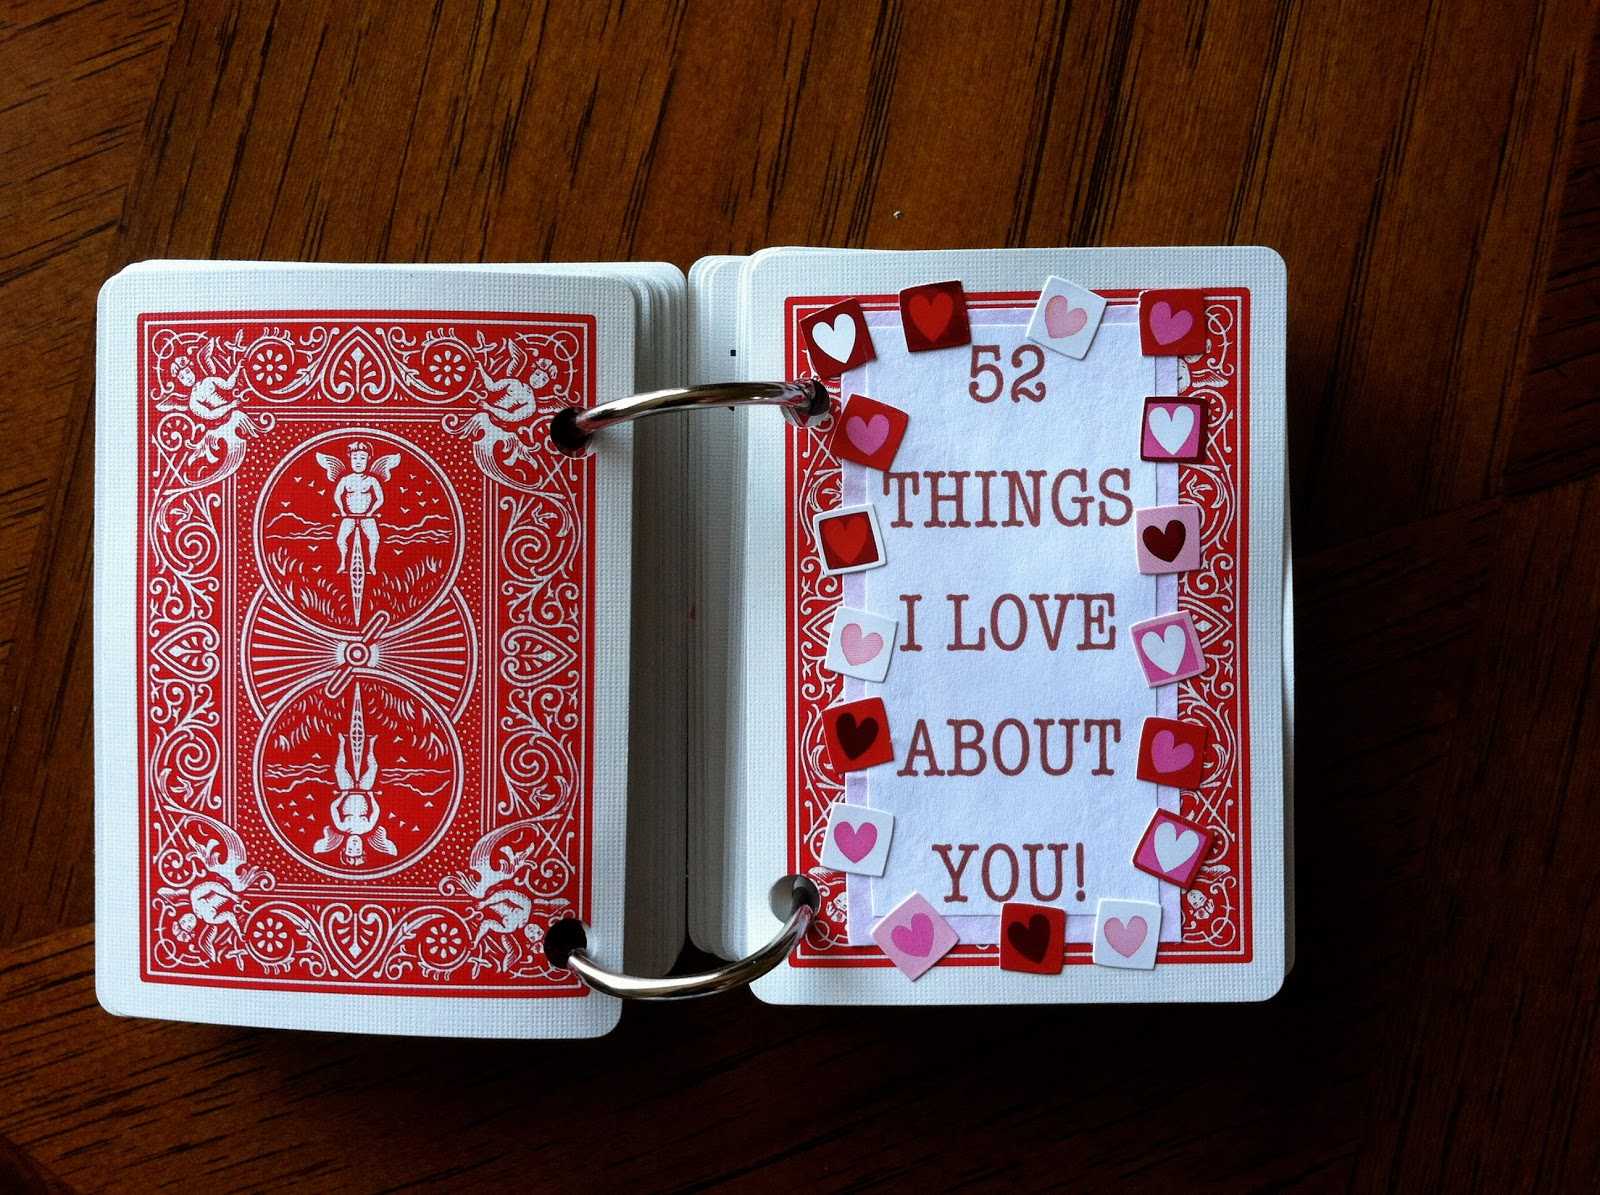 Om Mani Padme Hum: 52 Things I Love About You! In 52 Things I Love About You Deck Of Cards Template